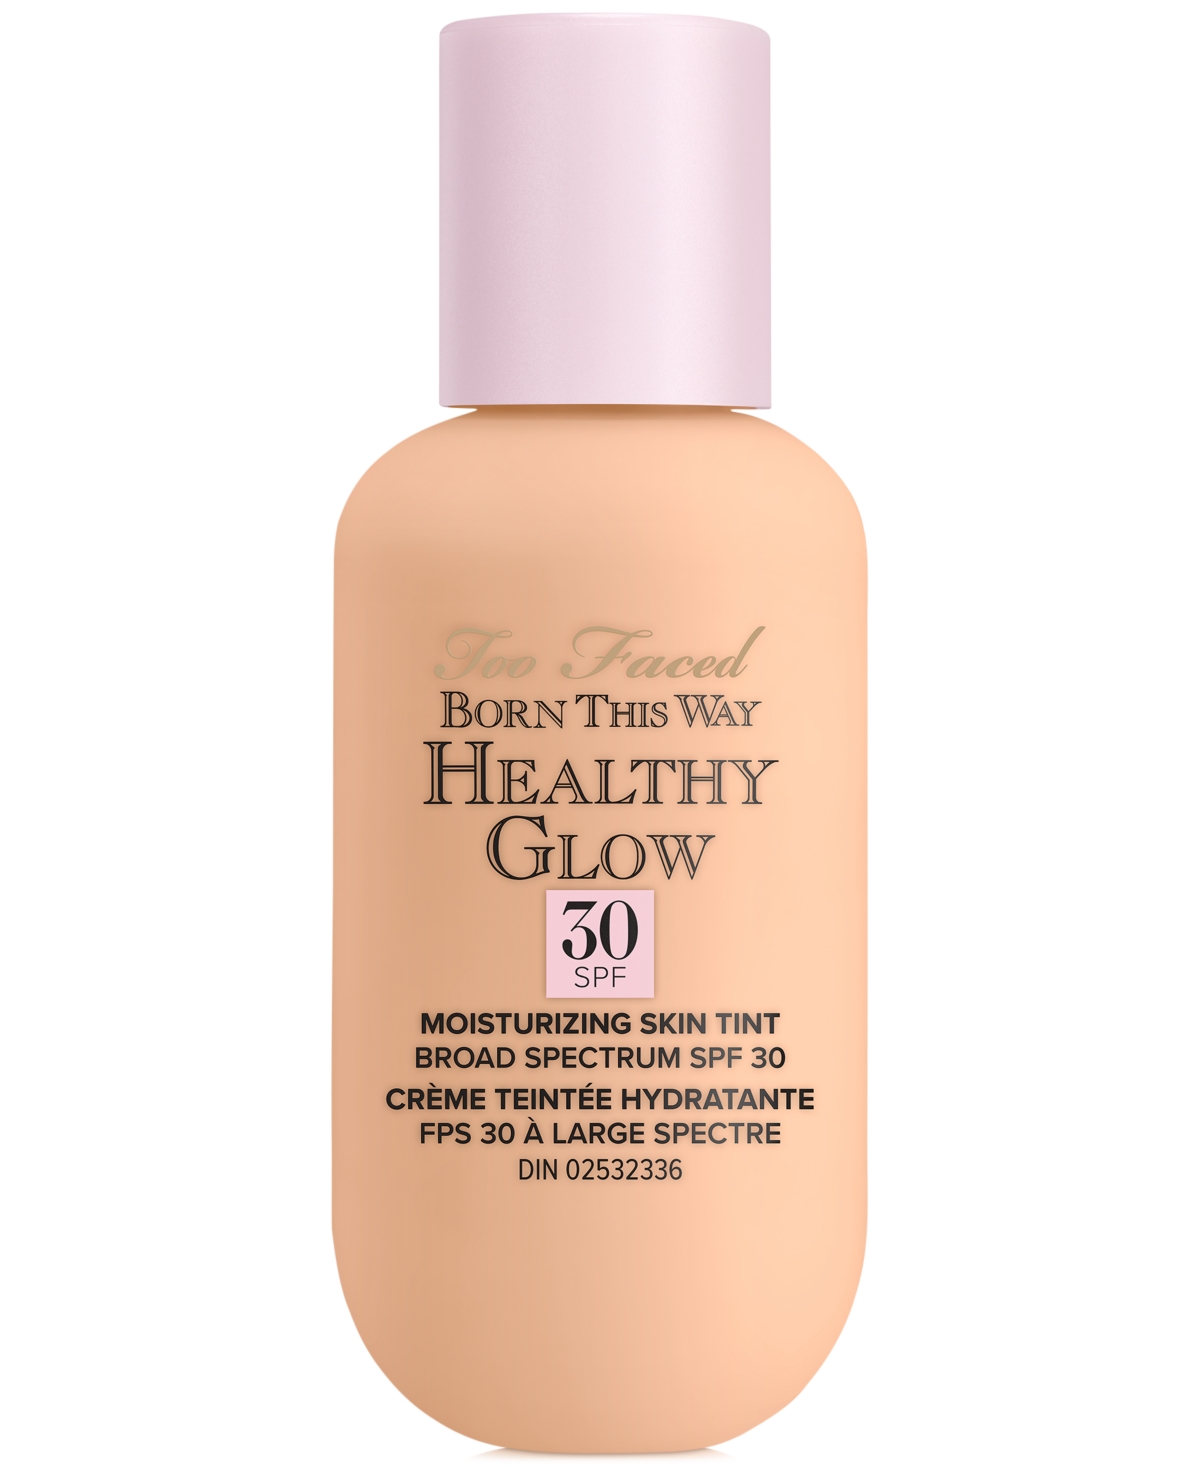 Too Faced Born This Way Healthy Glow Moisturizing Skin Tint Spf 30 In Nude